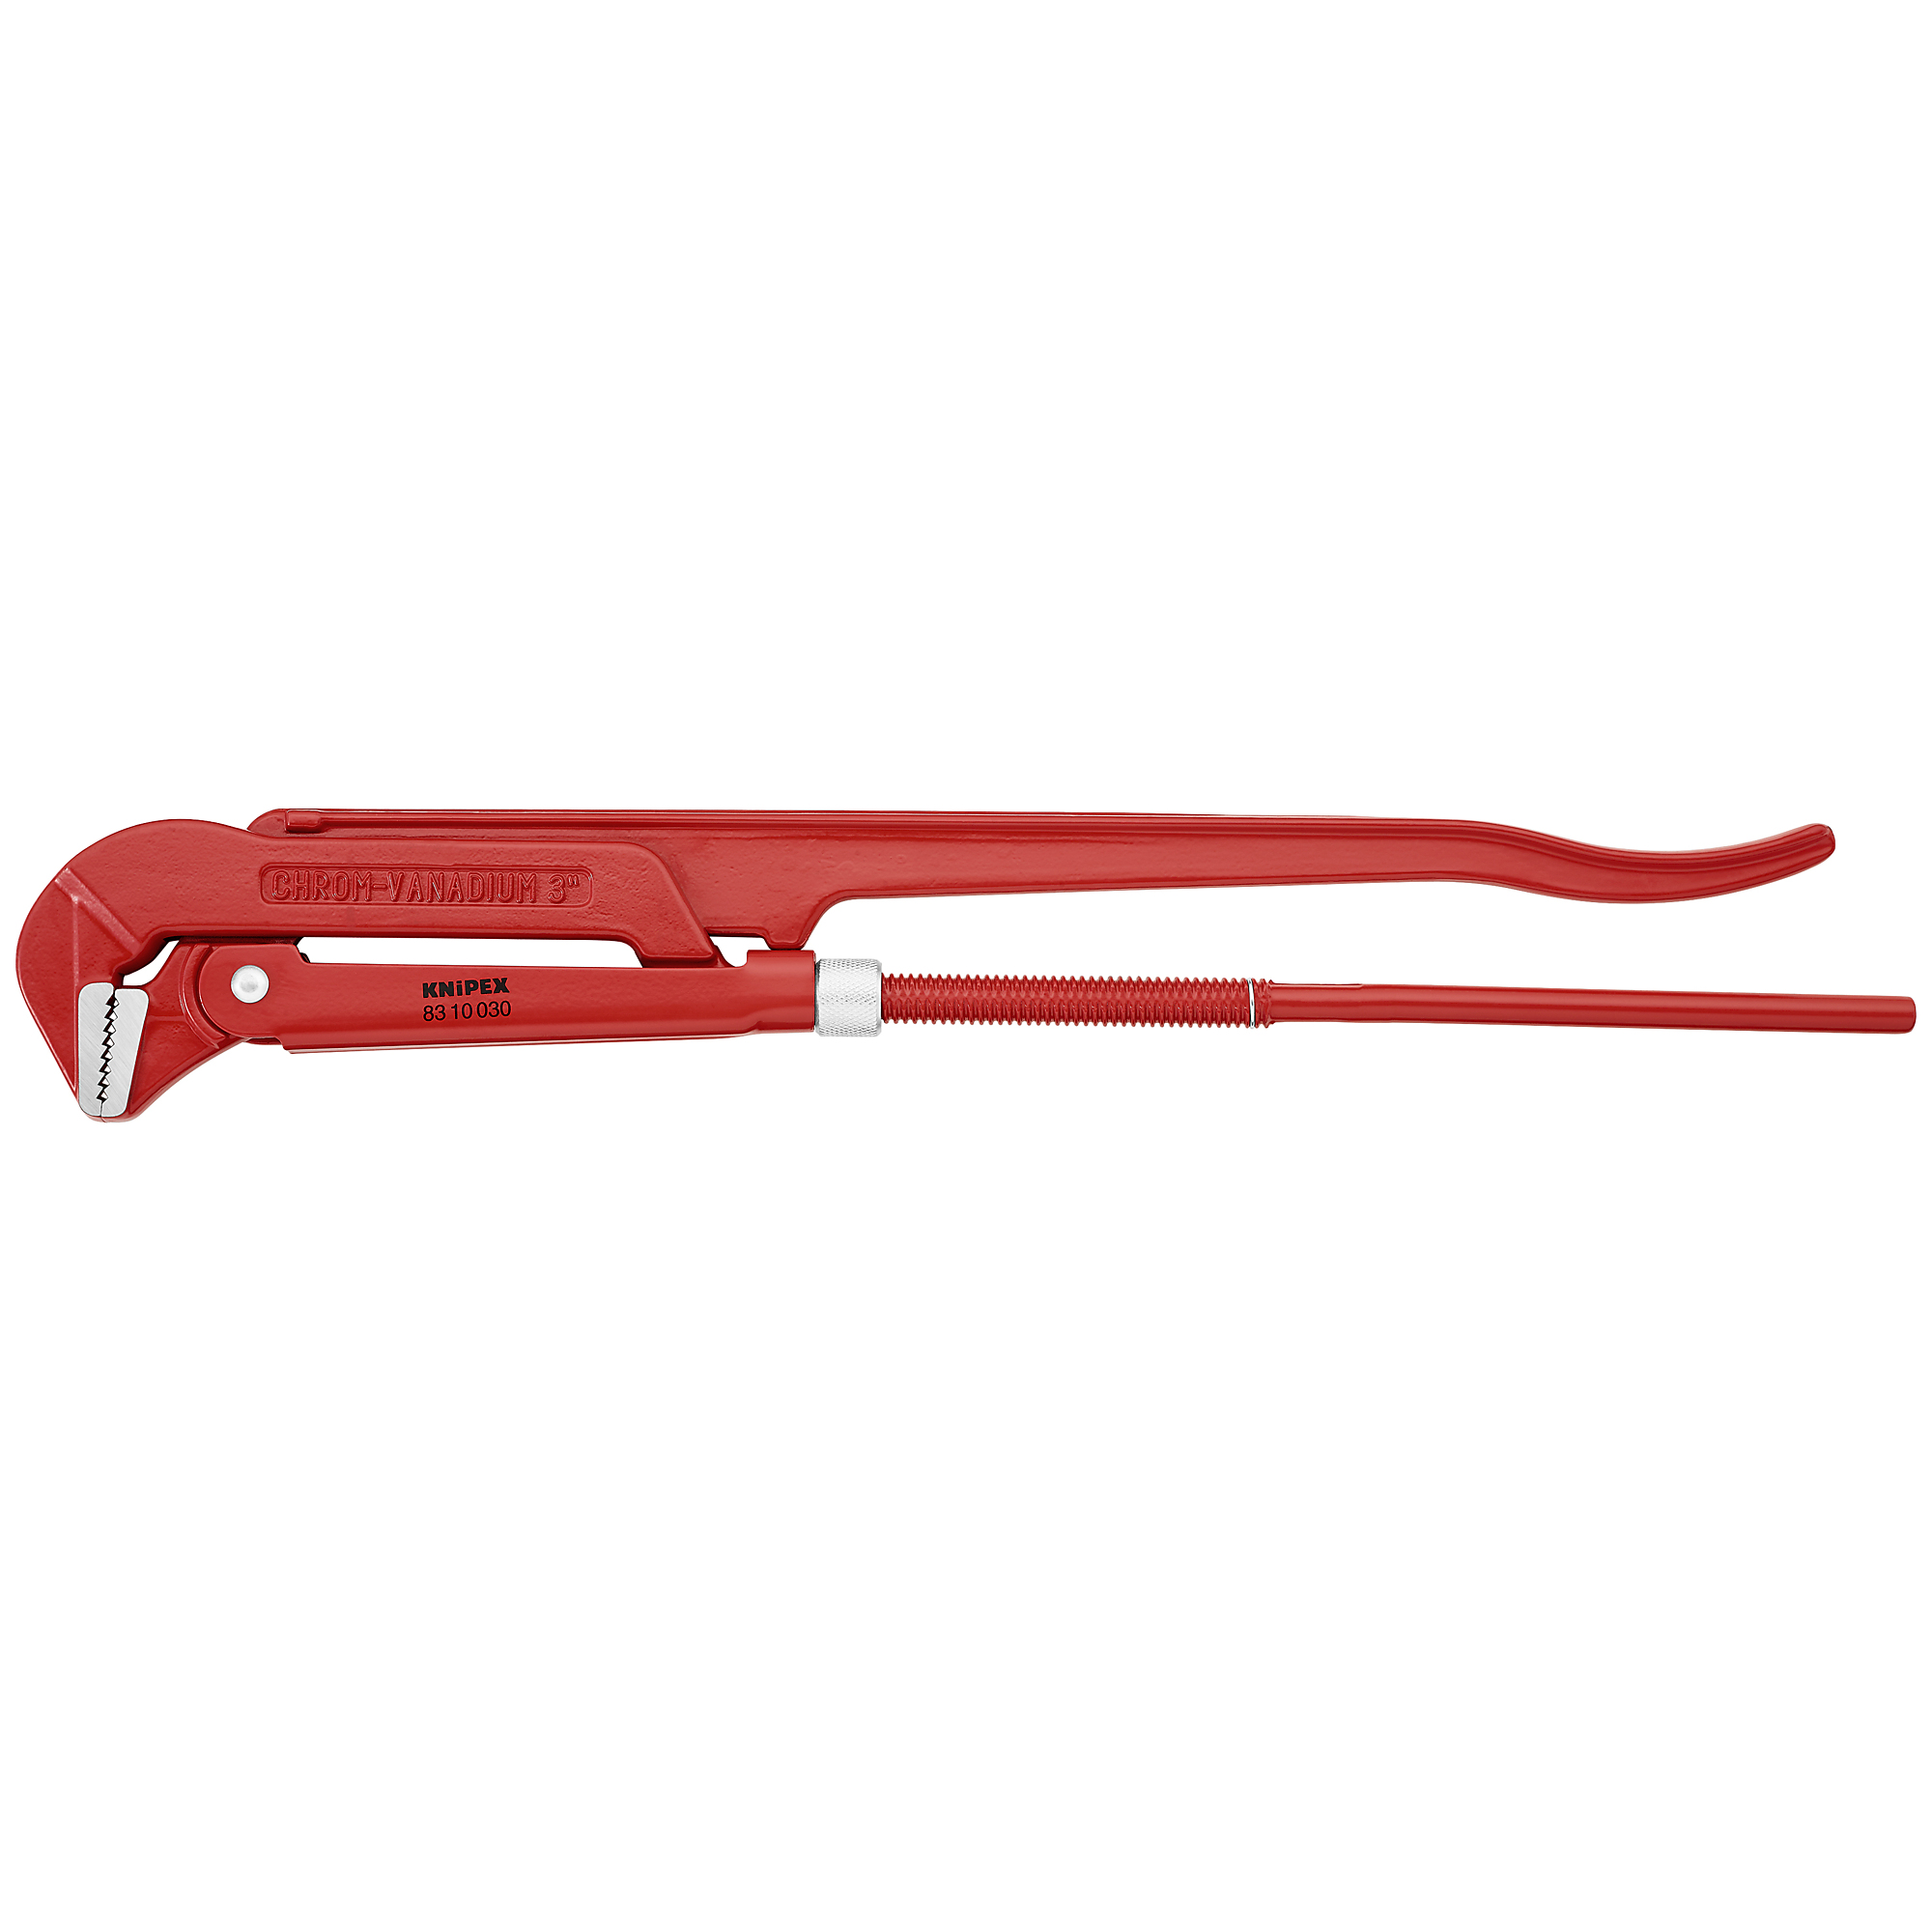 KNIPEX, Swedish Pipe Wrench-90Â°, 25Inch, Pieces (qty.) 1 Material Steel, Jaw Capacity 4.375 in, Model 83 10 030